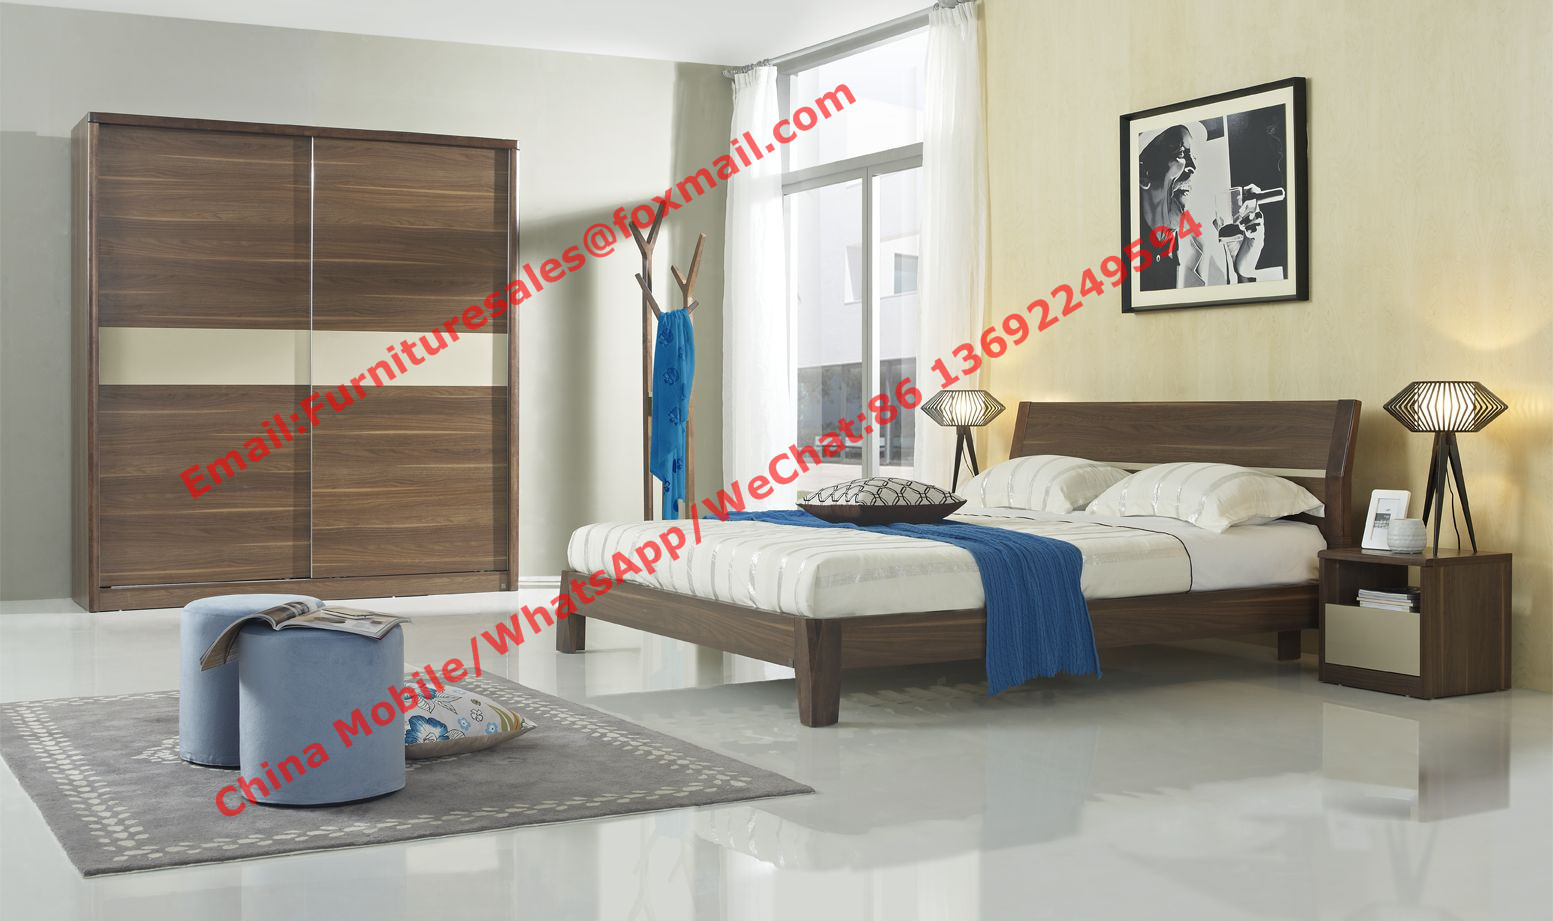  Wood & Panel furniture in modern deisgn Walnut color by KD bed with Sliding door wardrobe Manufactures